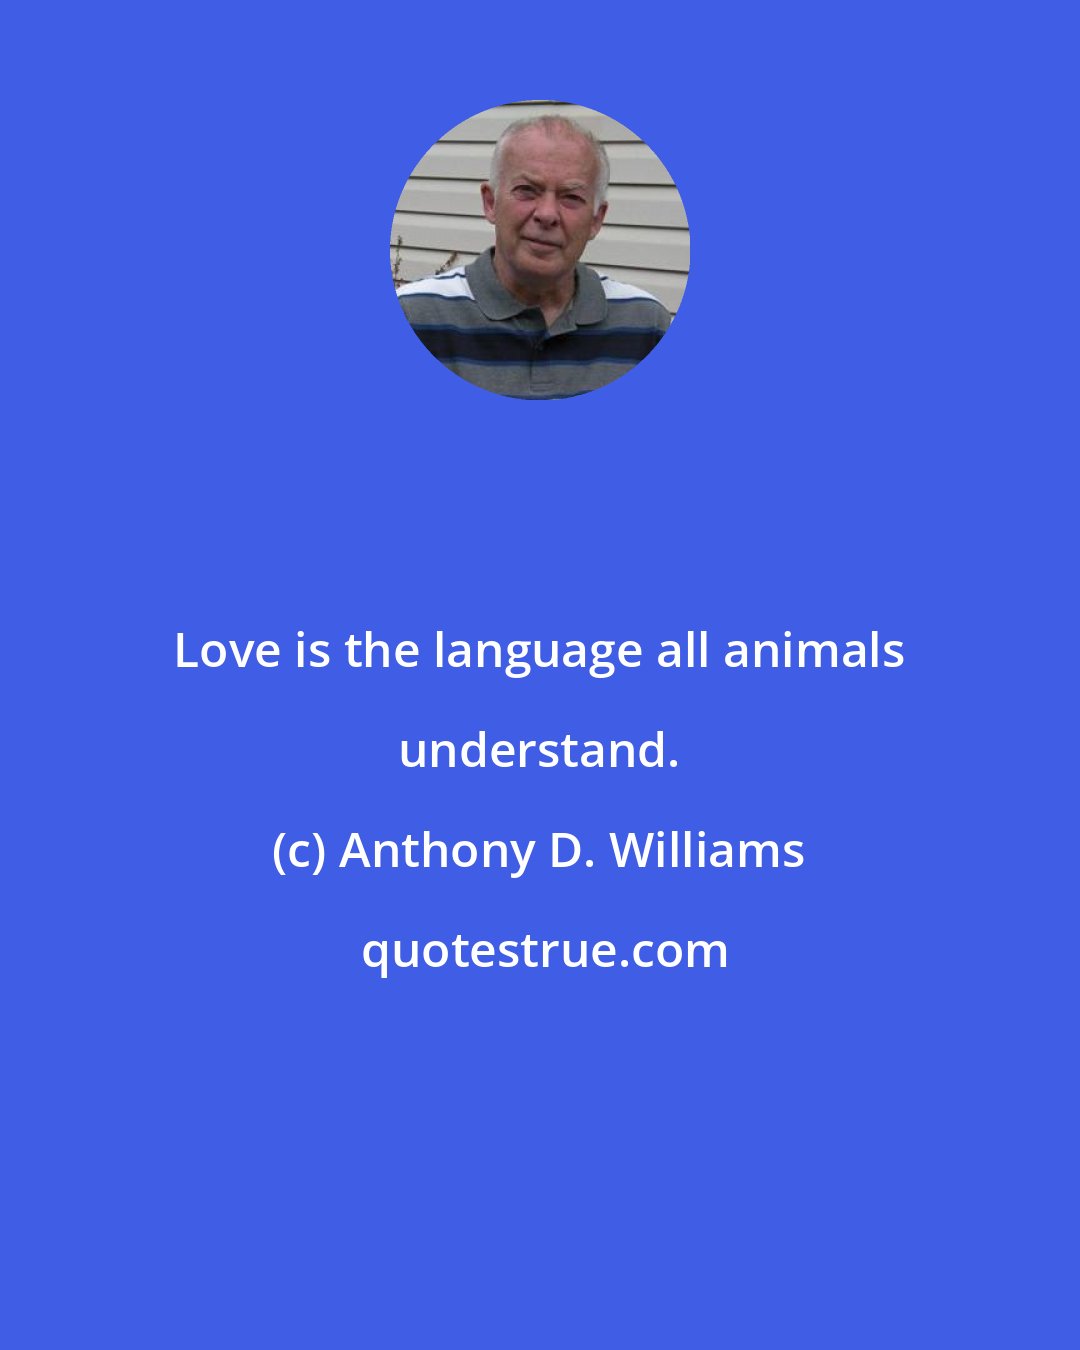 Anthony D. Williams: Love is the language all animals understand.